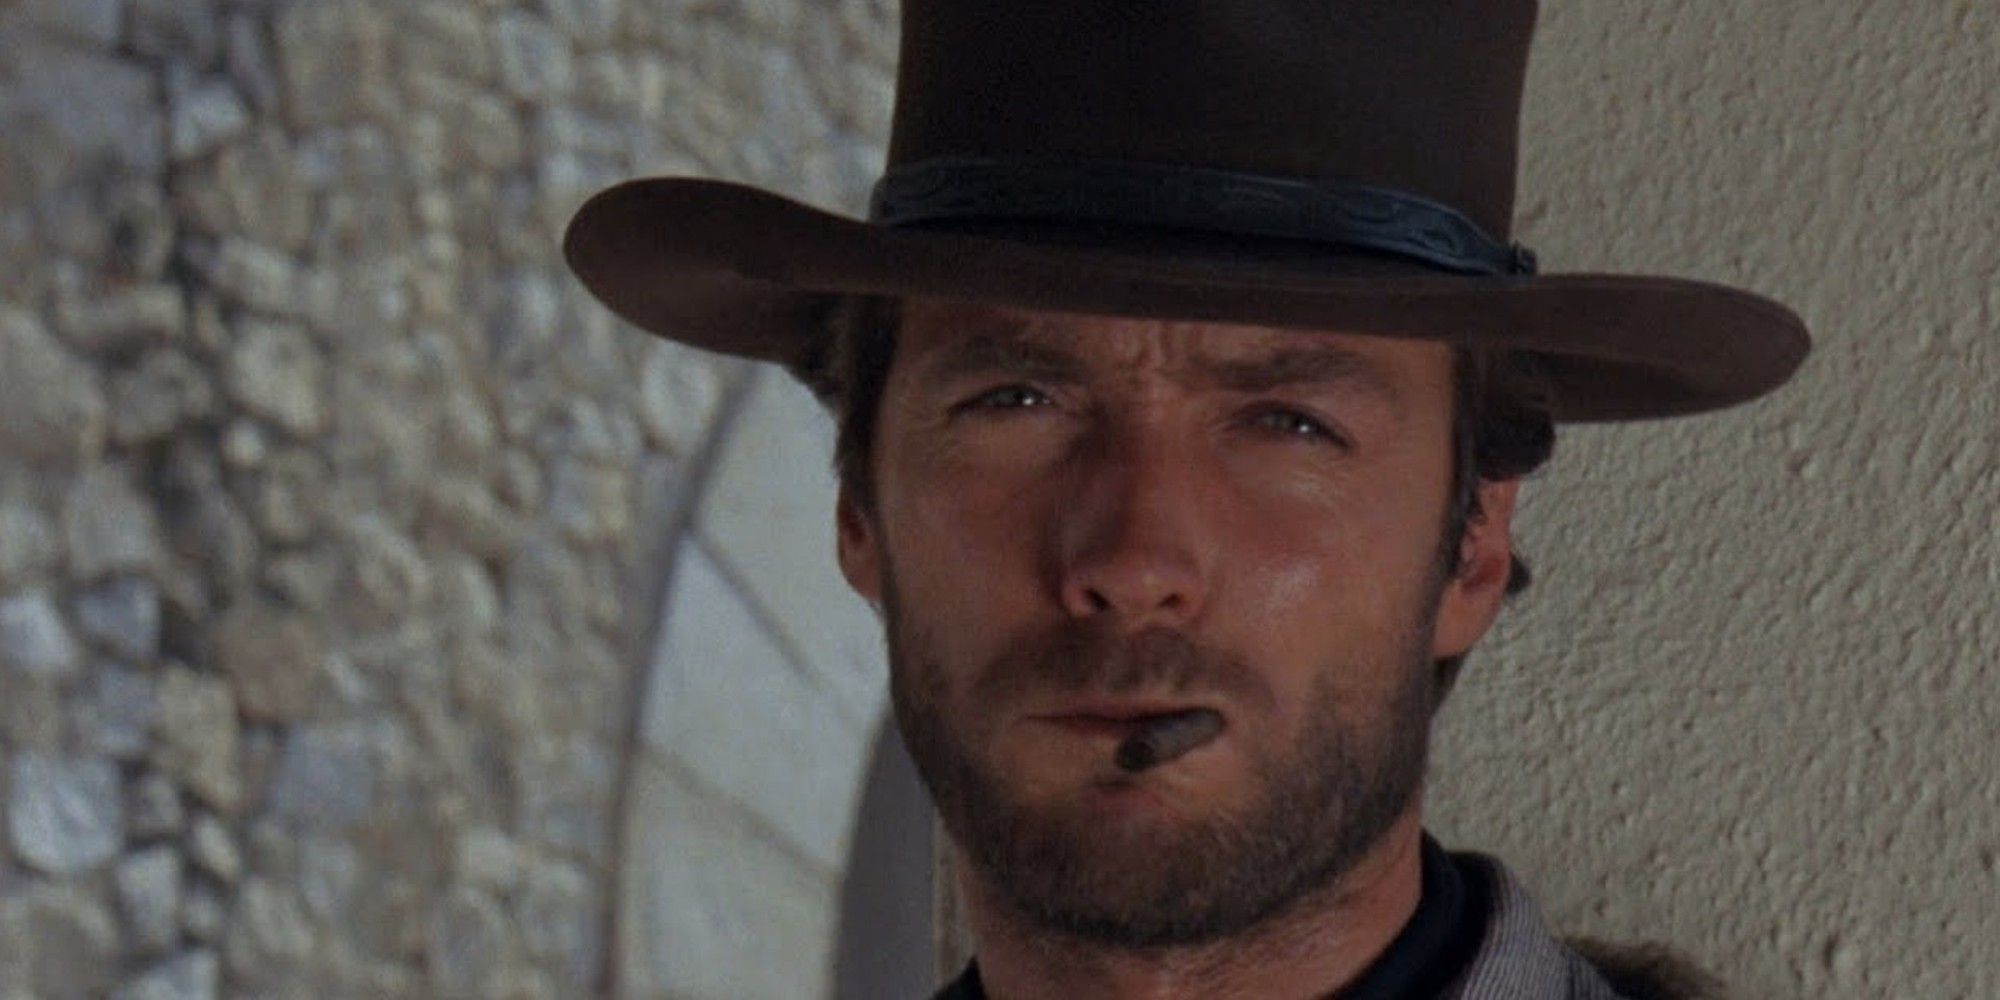 Clint Eastwood smoking a cigarrette and squinting in 'A Fistful of Dollars' (1964)